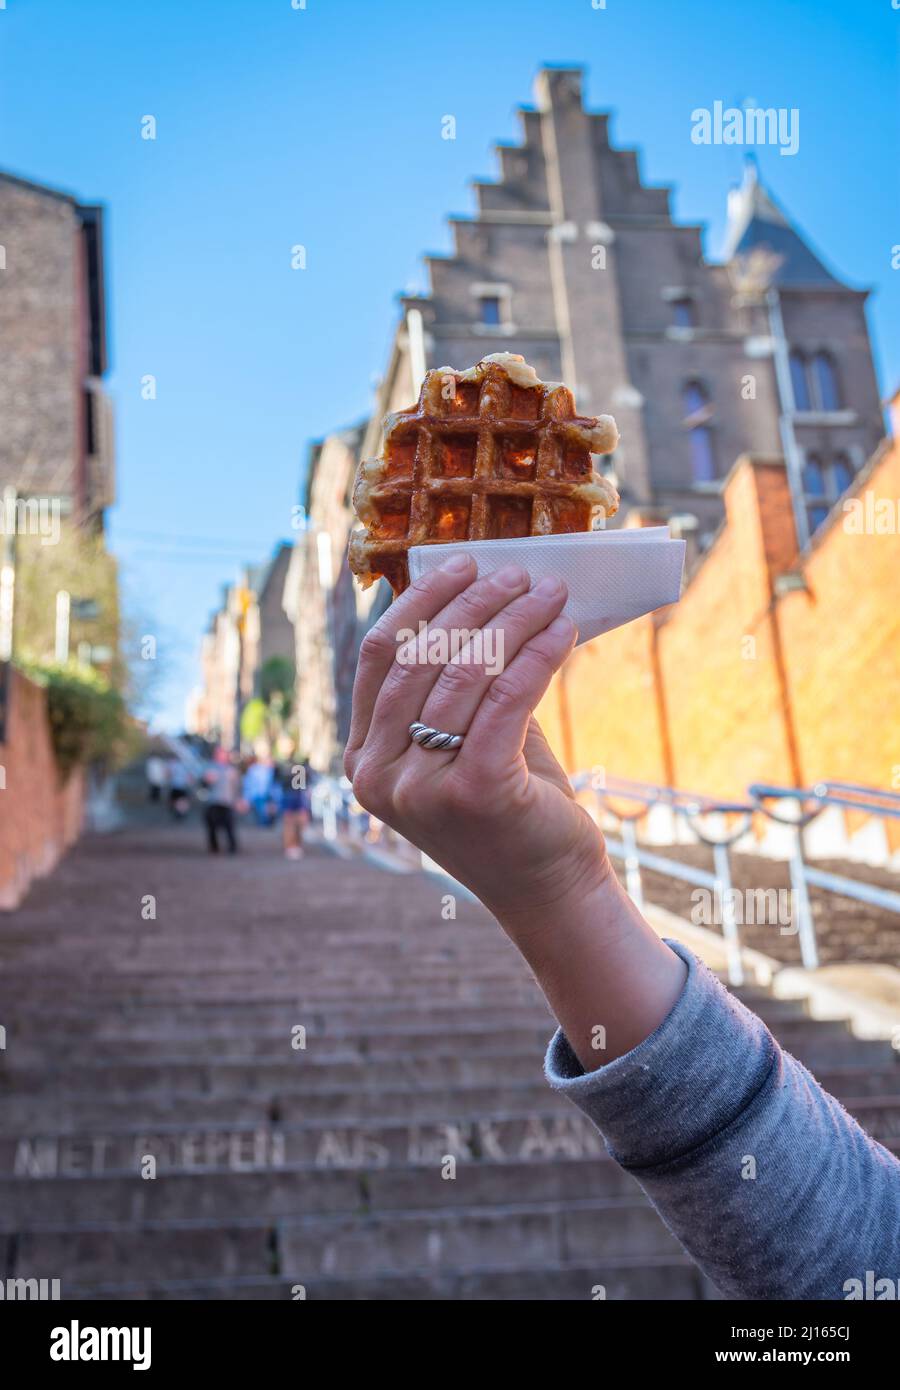 Delicious belgian waffle held in front of blurred background of Montagne de Bueren staircase in Liege, which is a city's top tourist attraction Stock Photo